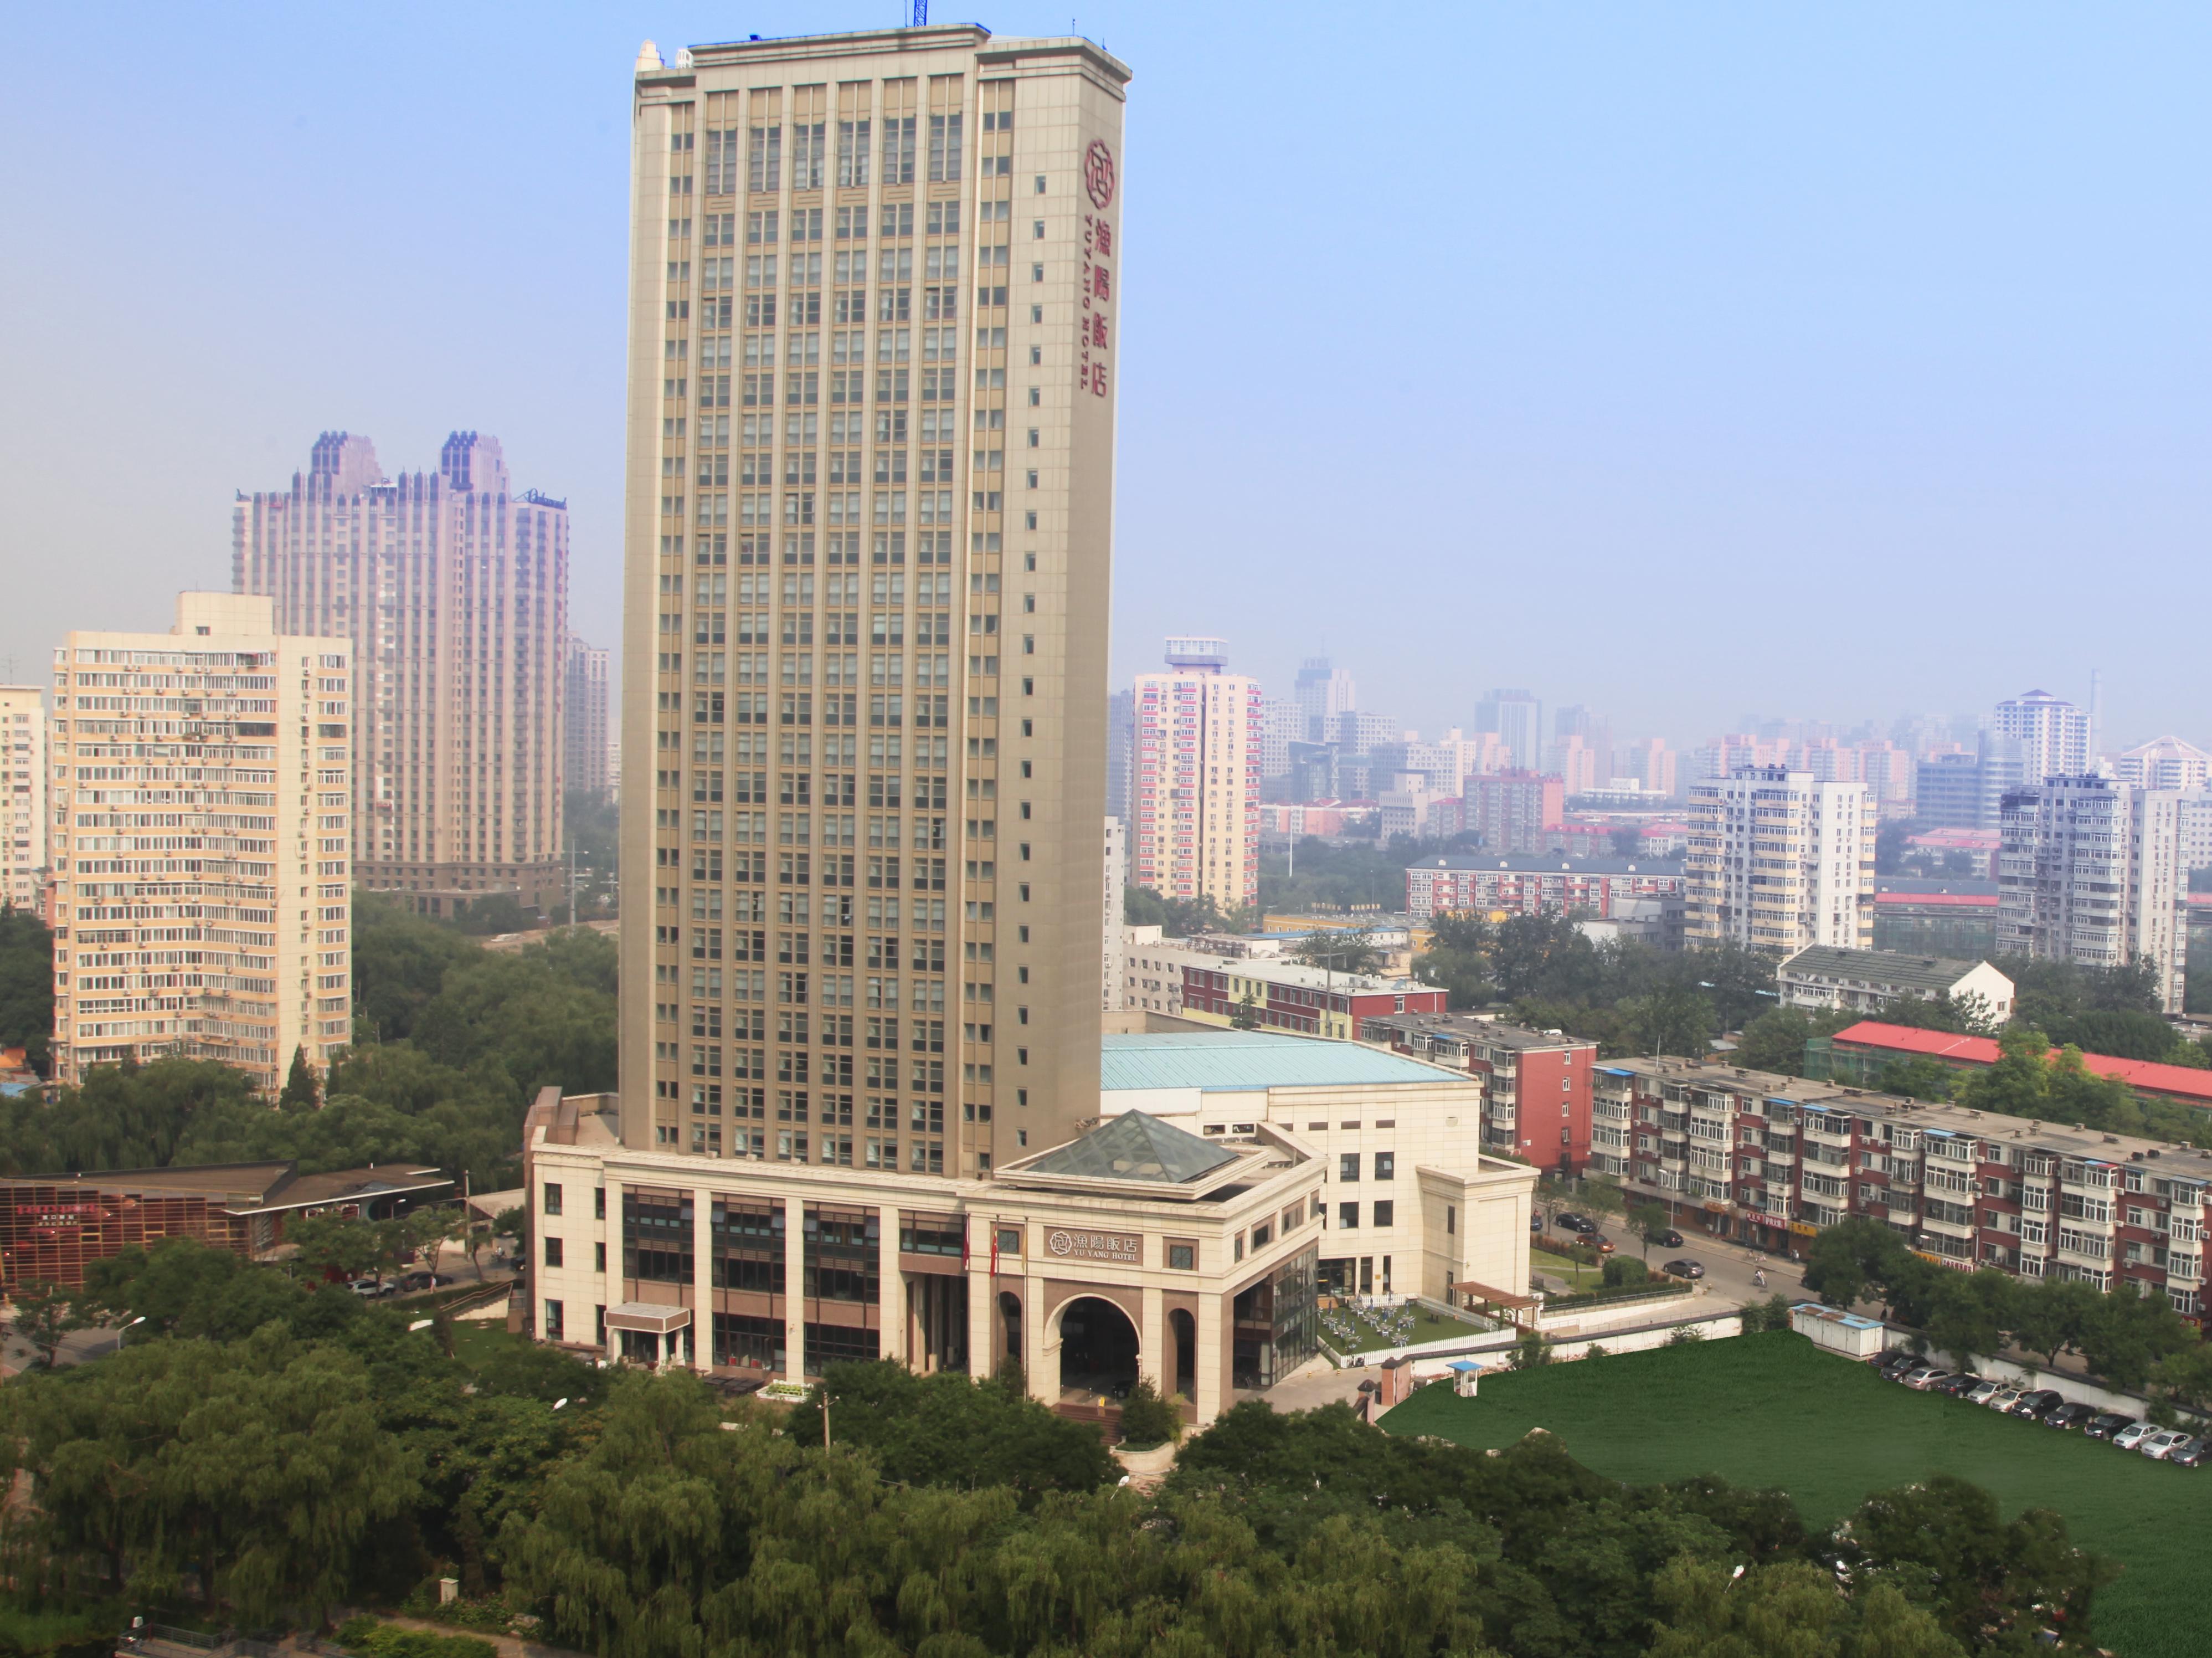 Yuyang Riverview Hotel Beijing FAQ 2017, What facilities are there in Yuyang Riverview Hotel Beijing 2017, What Languages Spoken are Supported in Yuyang Riverview Hotel Beijing 2017, Which payment cards are accepted in Yuyang Riverview Hotel Beijing , Beijing Yuyang Riverview Hotel room facilities and services Q&A 2017, Beijing Yuyang Riverview Hotel online booking services 2017, Beijing Yuyang Riverview Hotel address 2017, Beijing Yuyang Riverview Hotel telephone number 2017,Beijing Yuyang Riverview Hotel map 2017, Beijing Yuyang Riverview Hotel traffic guide 2017, how to go Beijing Yuyang Riverview Hotel, Beijing Yuyang Riverview Hotel booking online 2017, Beijing Yuyang Riverview Hotel room types 2017.